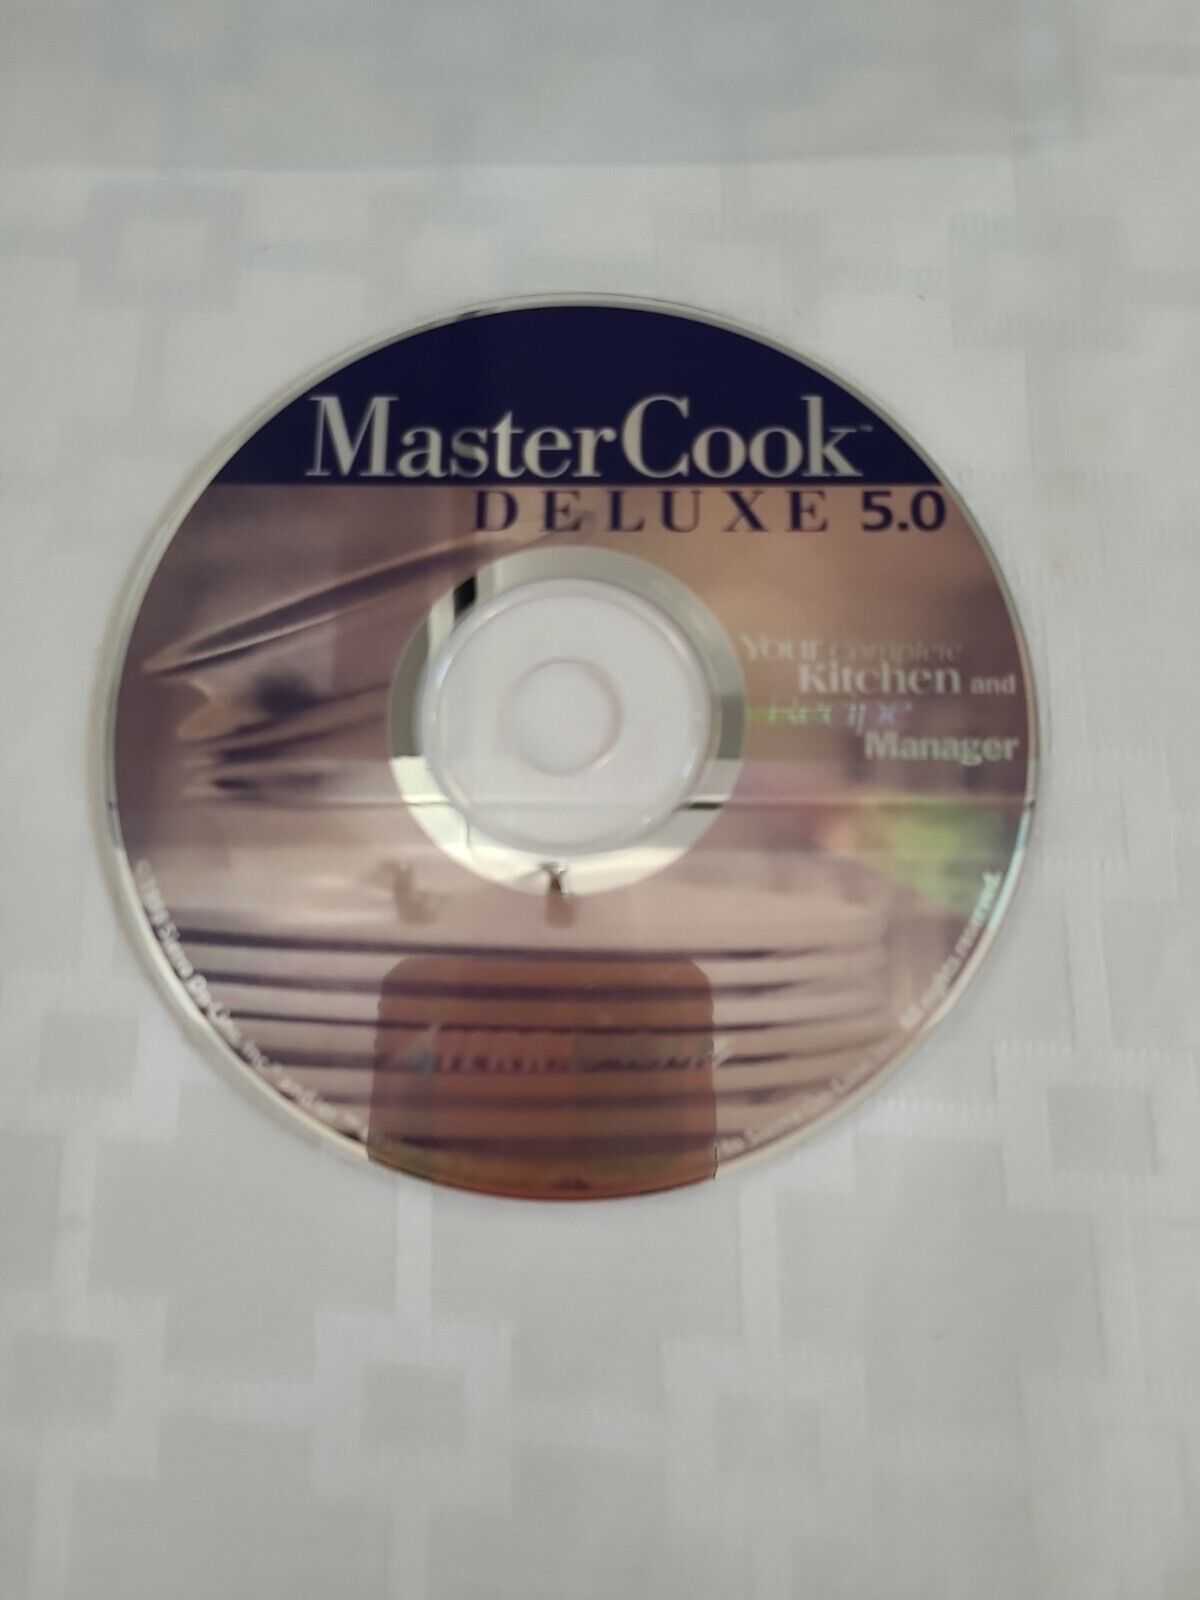 Sierra Home Deluxe Master Cook 5.0 PC Software Disc 1998